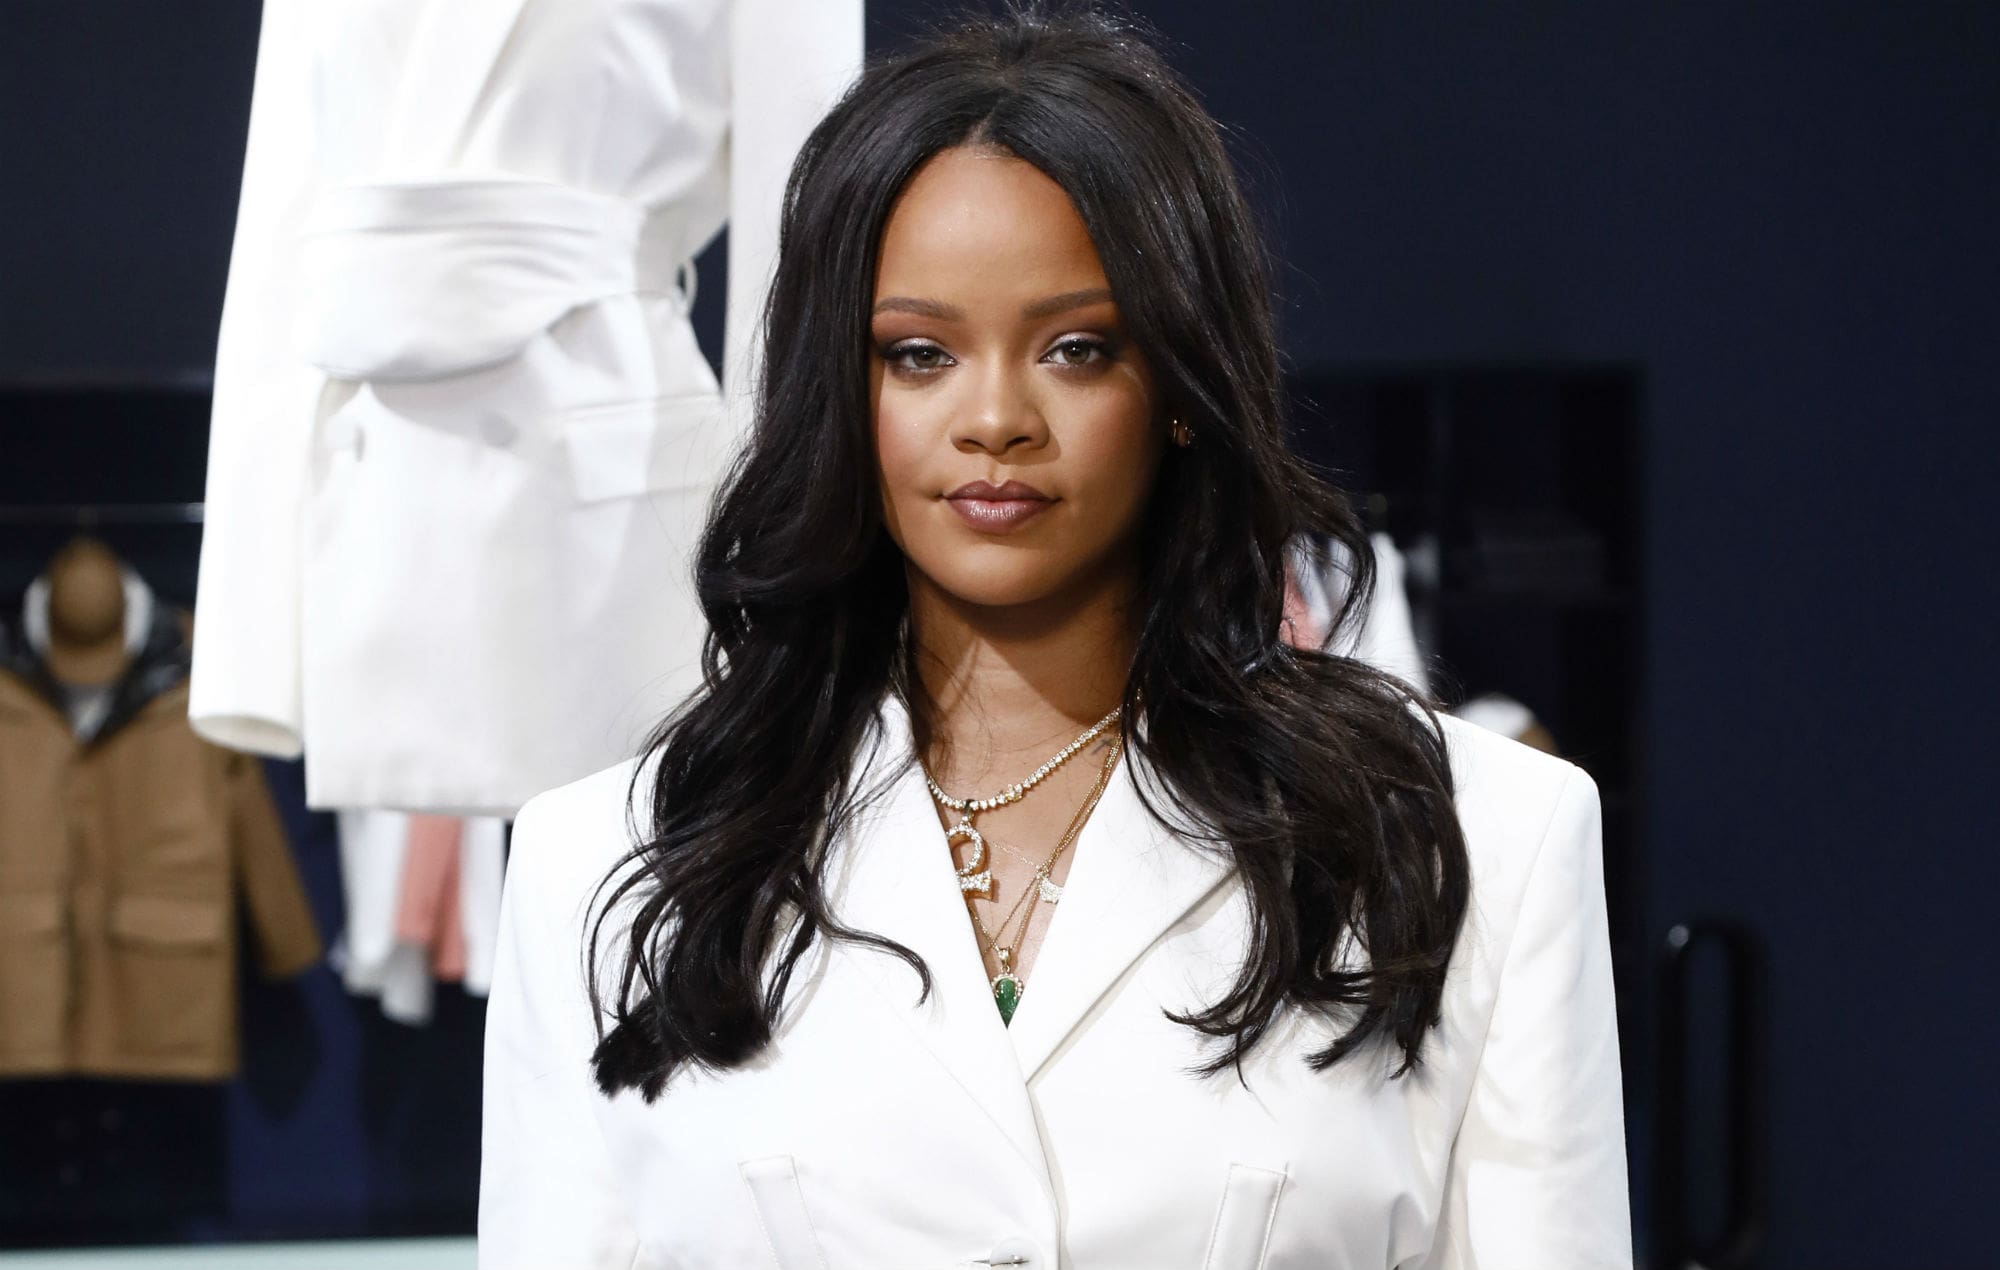 Rihanna Impresses Fans With A Video In Which She's Showing Off Her Jaw-Dropping Beach Body